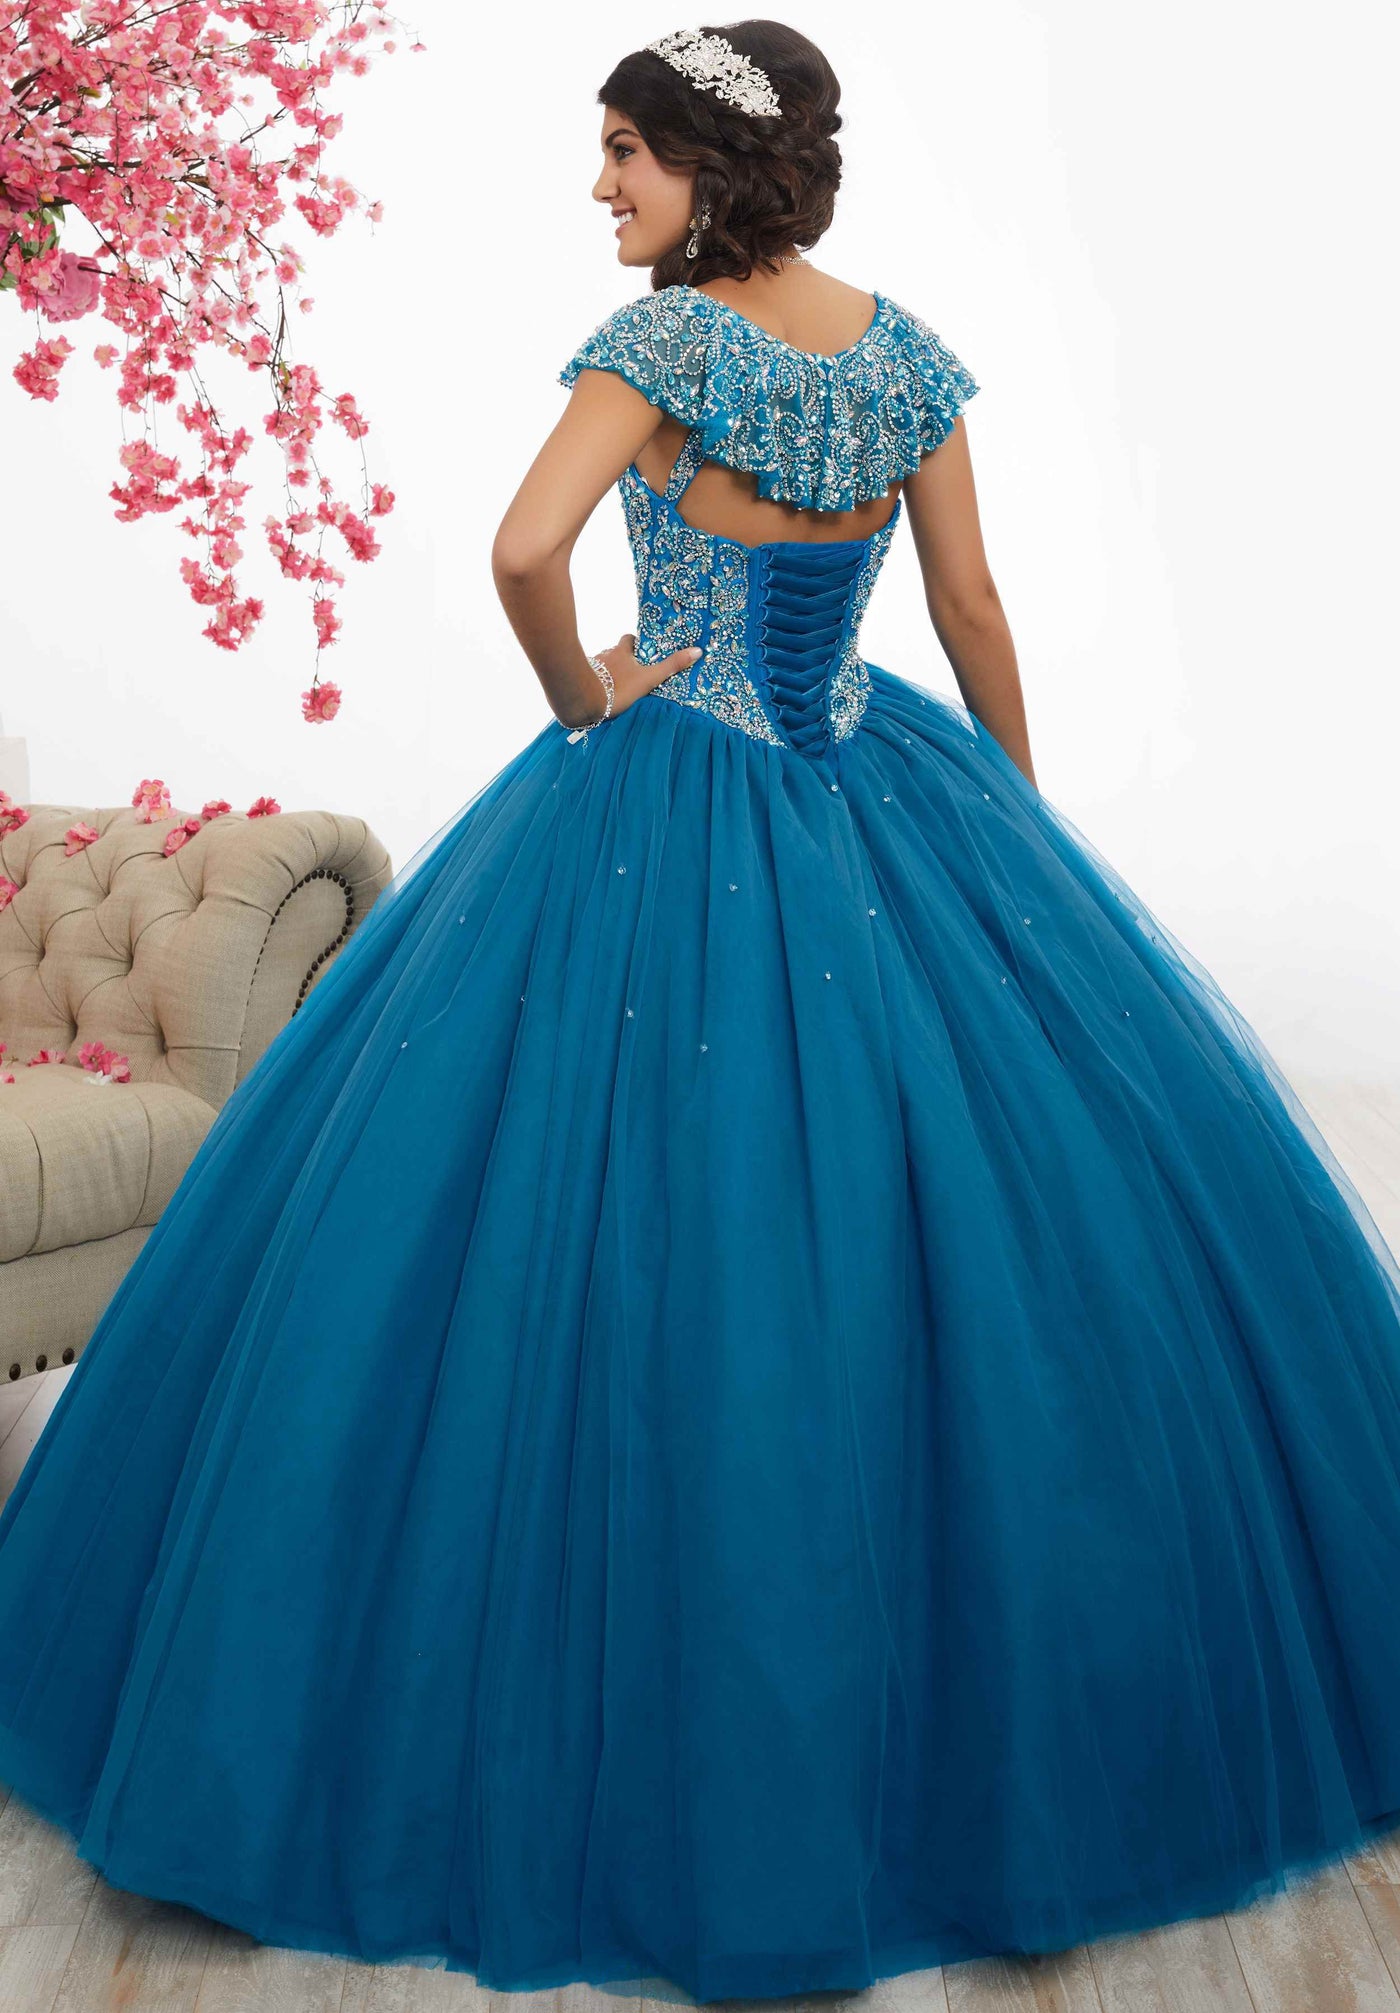 Fiesta Gowns - 56335 Beaded V-neck Tulle Ballgown Special Occasion Dress